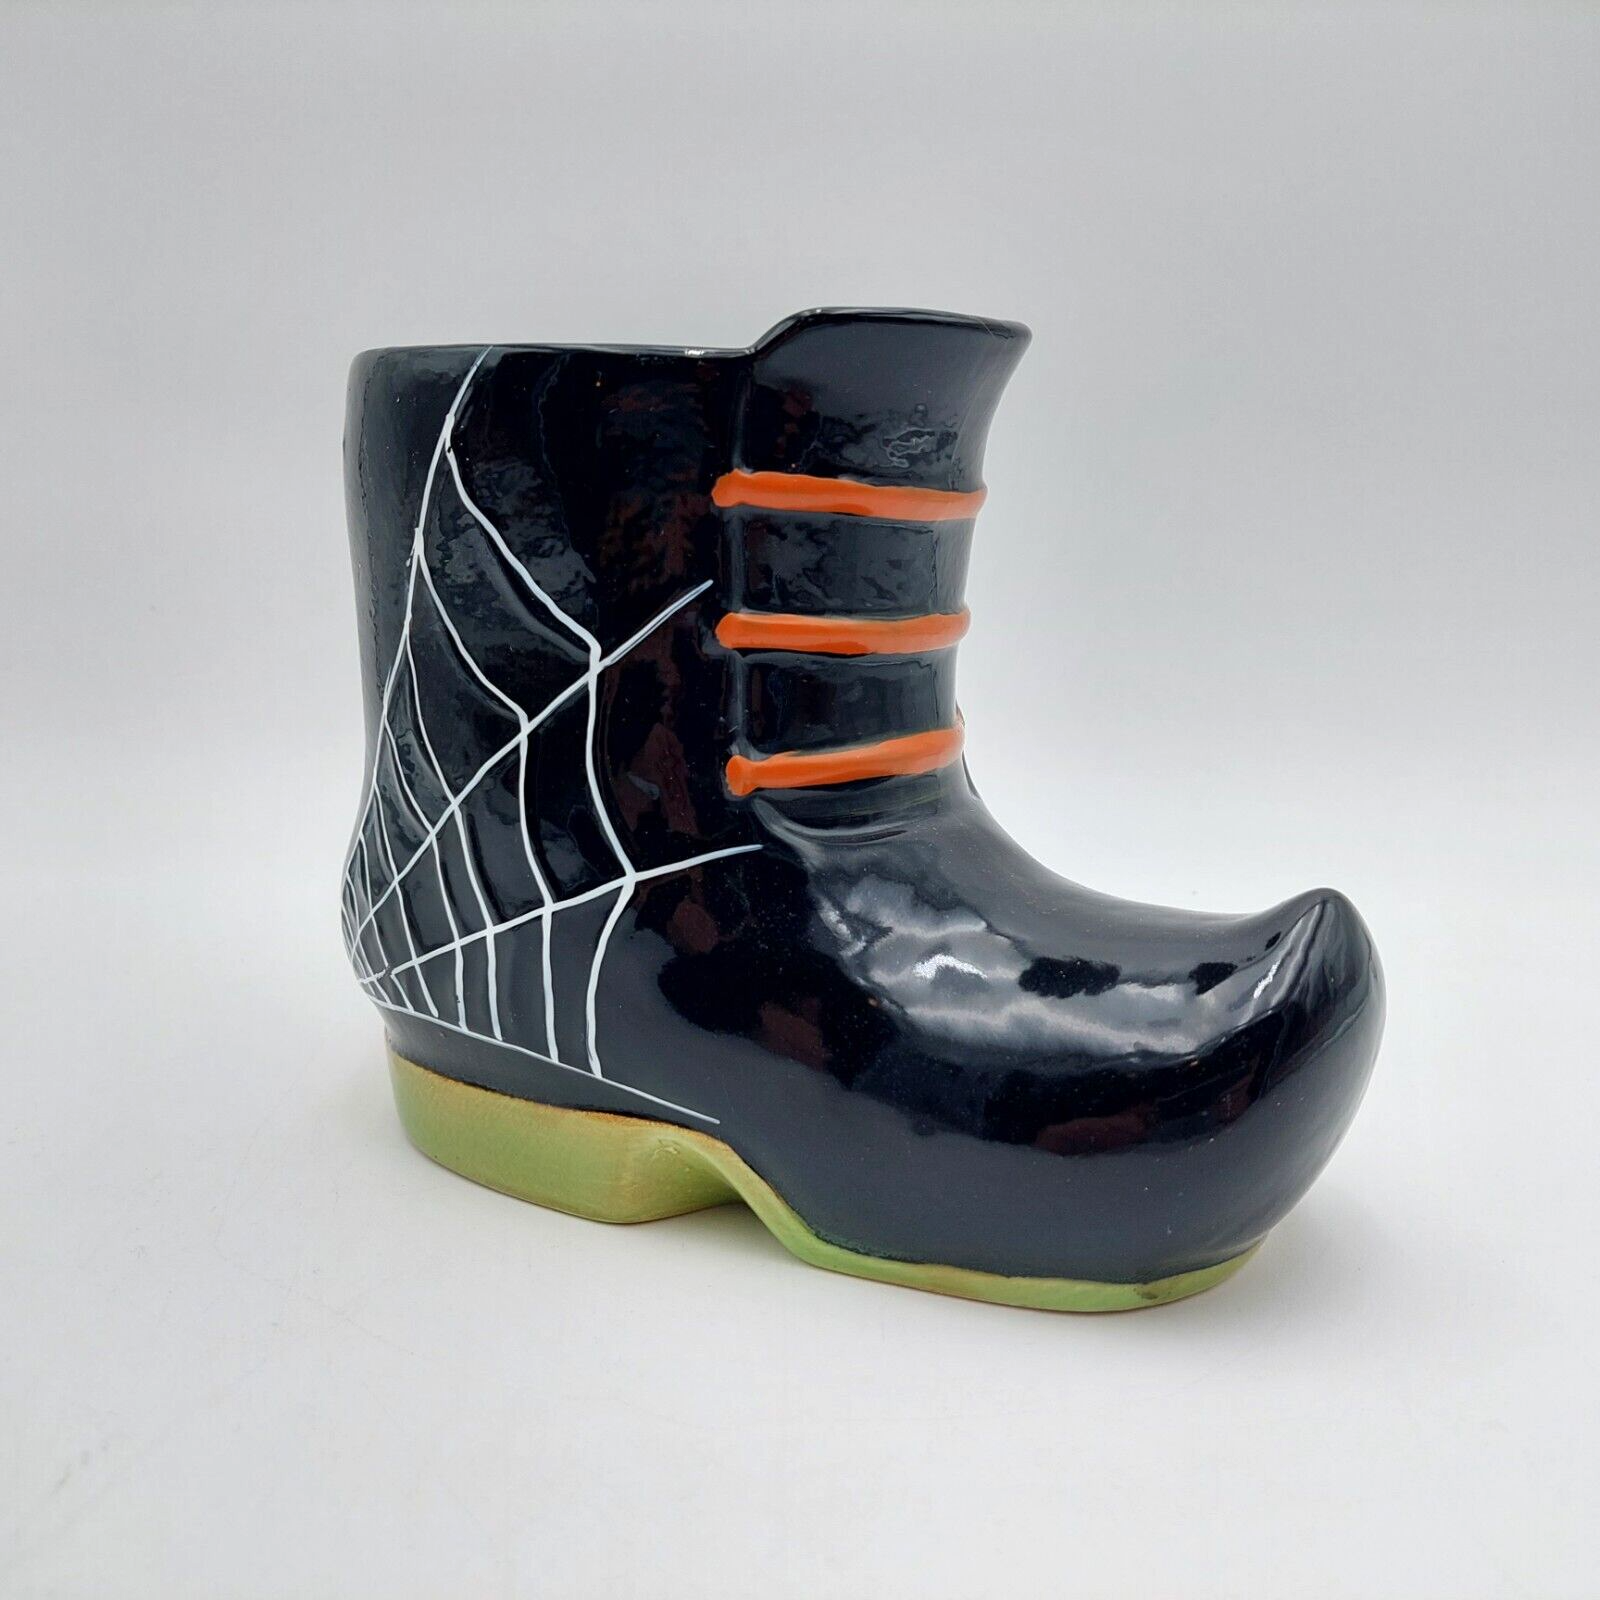 Primary image for Yankee Candle Halloween Black Witch Boot Jar Candle Holder Spider Web Limited Ed